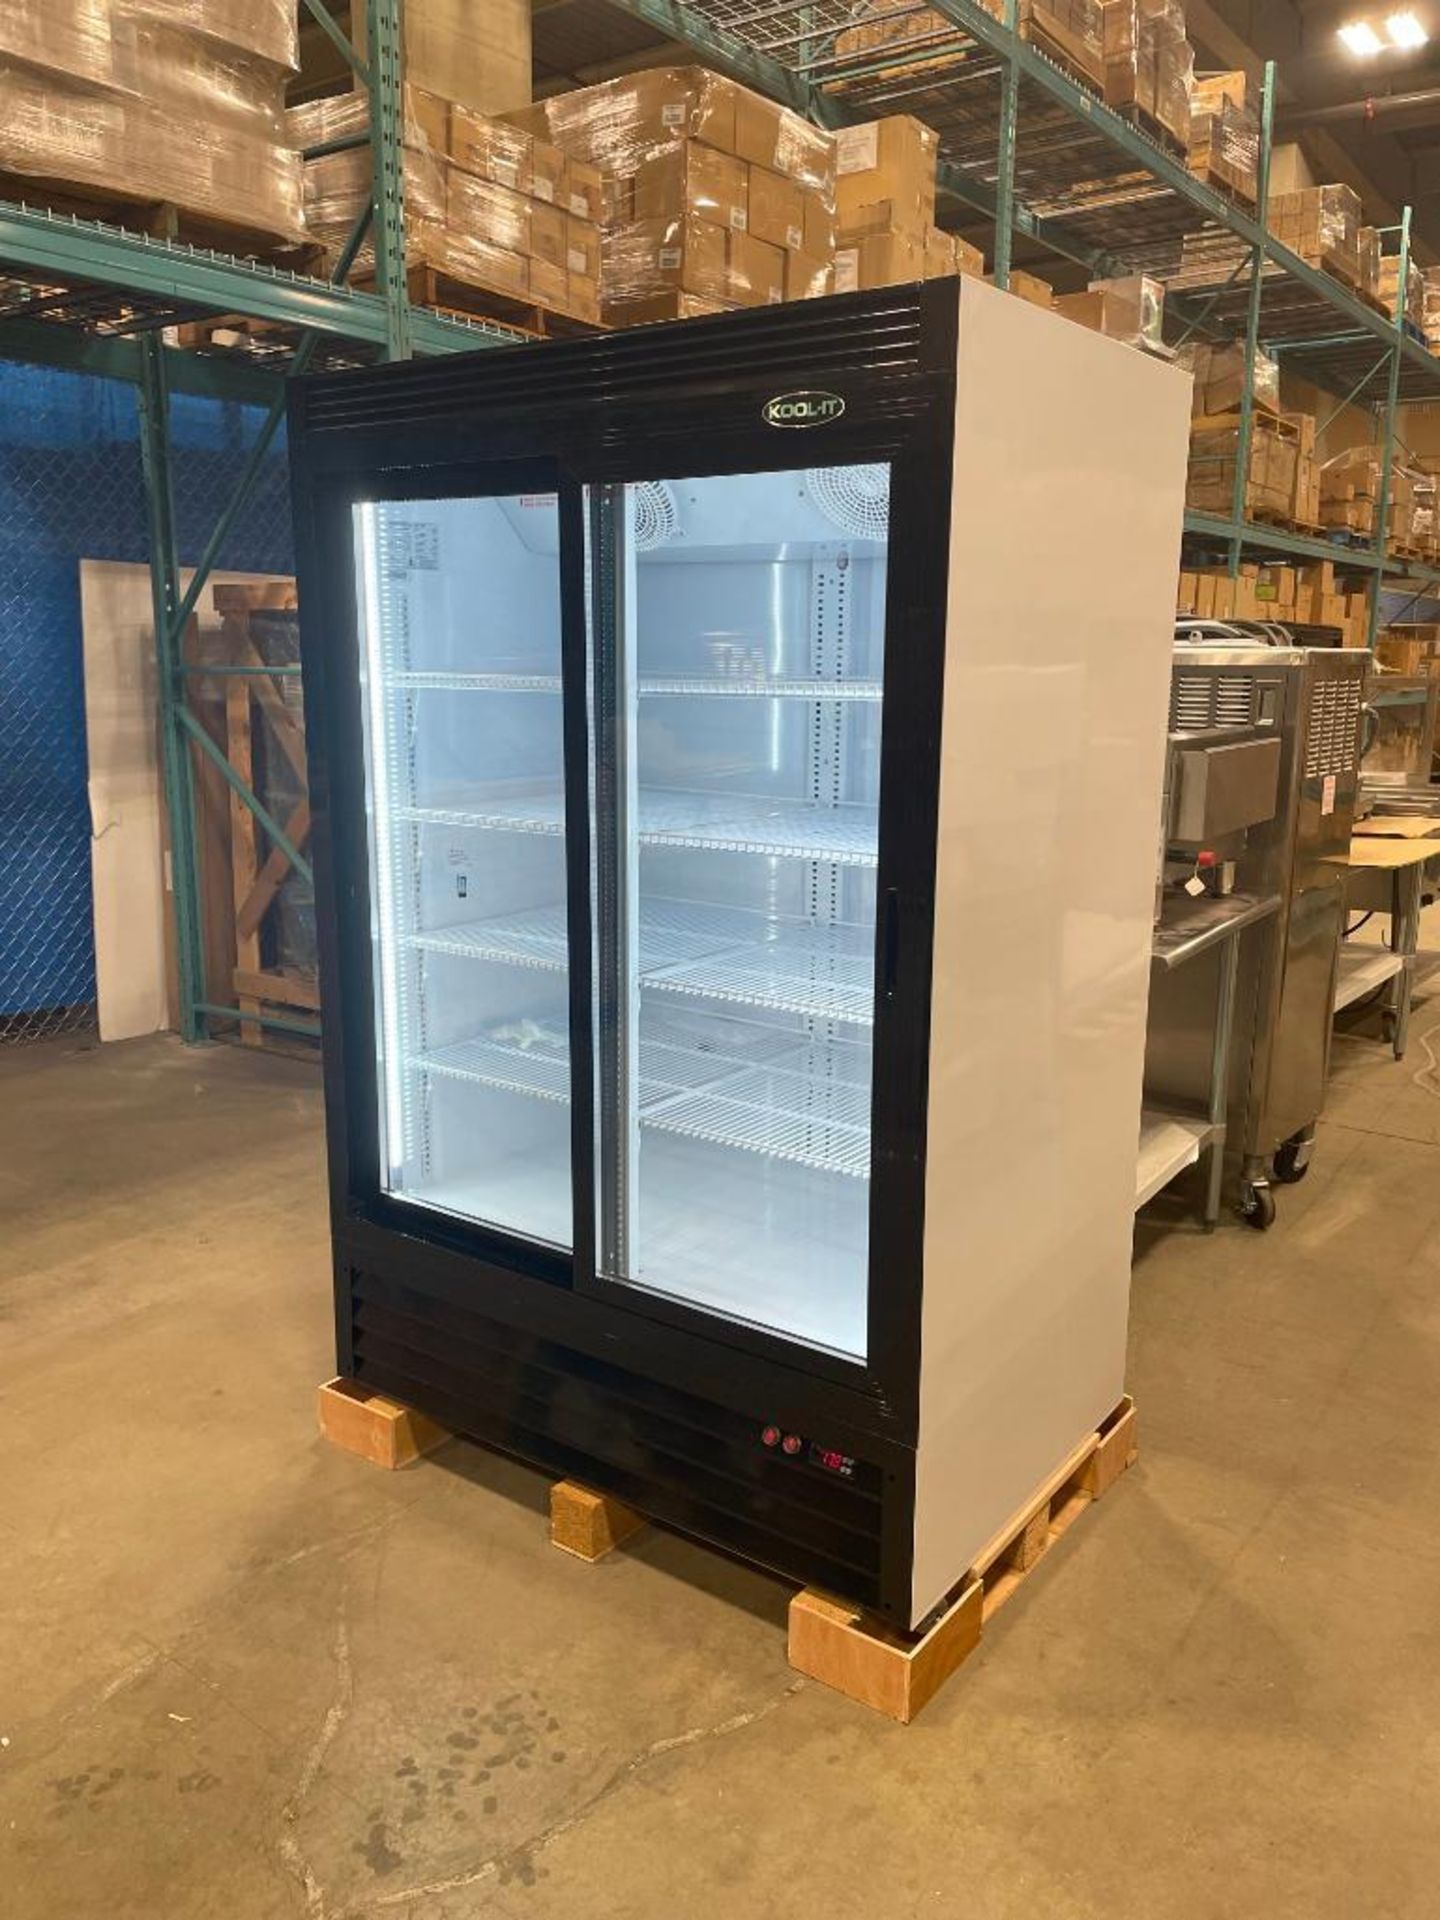 DOUBLE SLIDING GLASS DOOR COOLER, 33.5 CU. FT, LED DISPLAY - NEW - Image 2 of 12